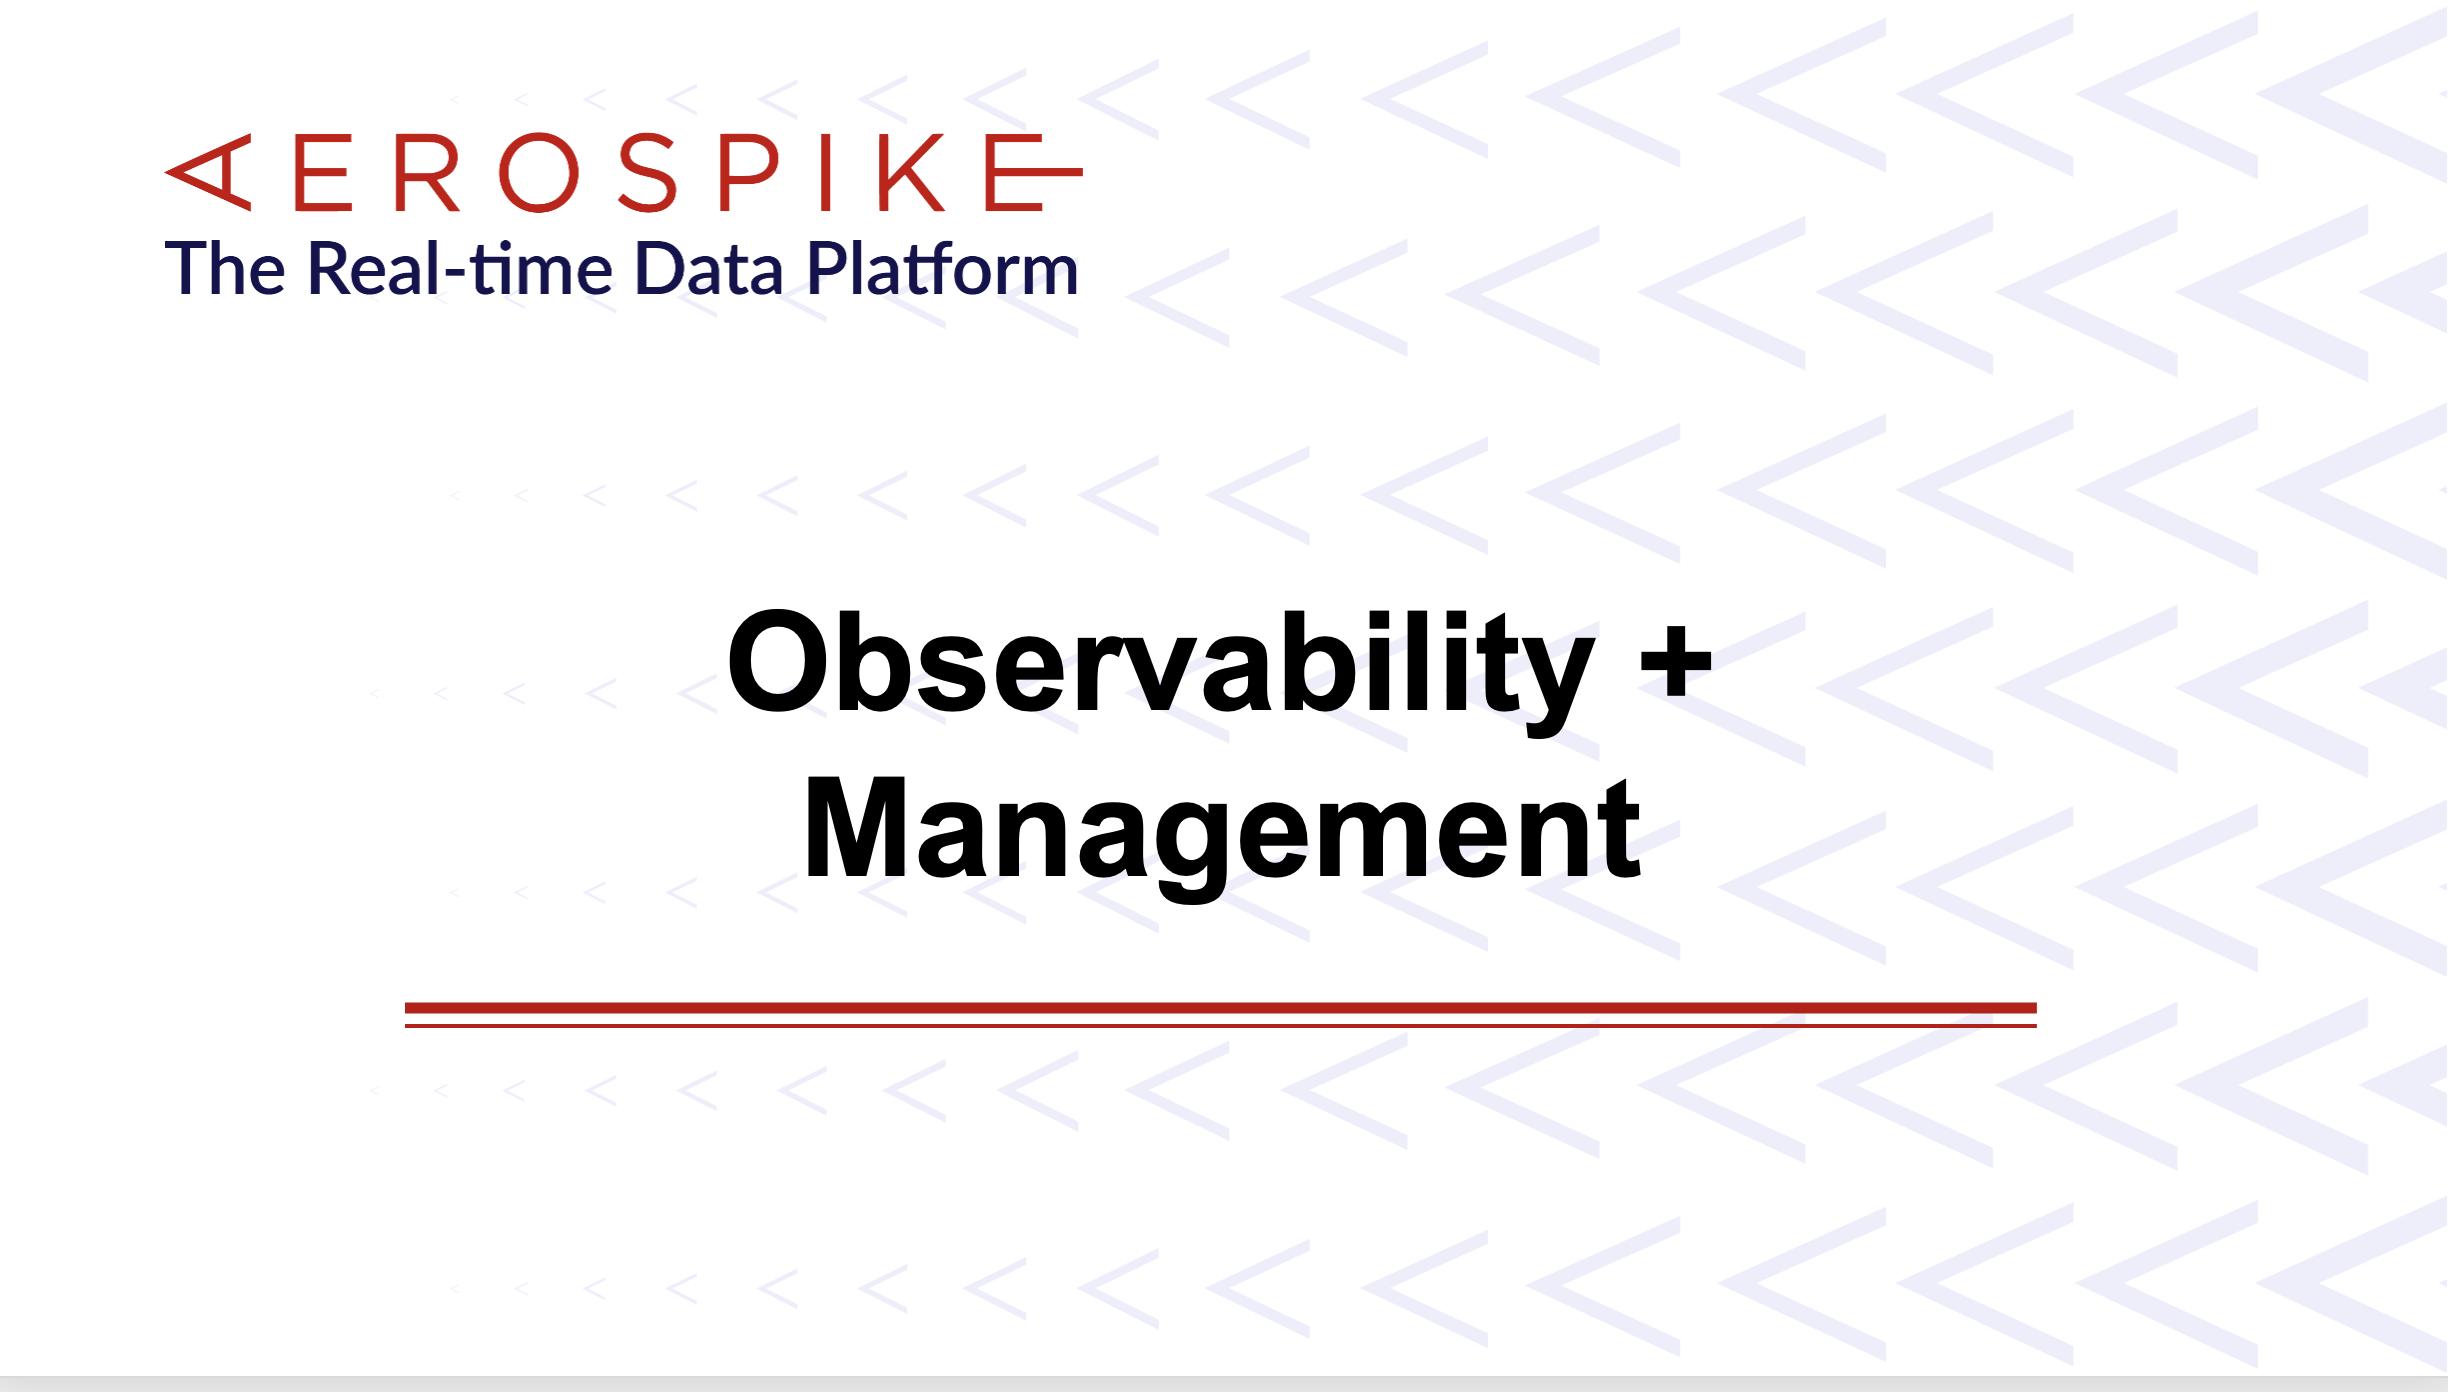 Observability and Management